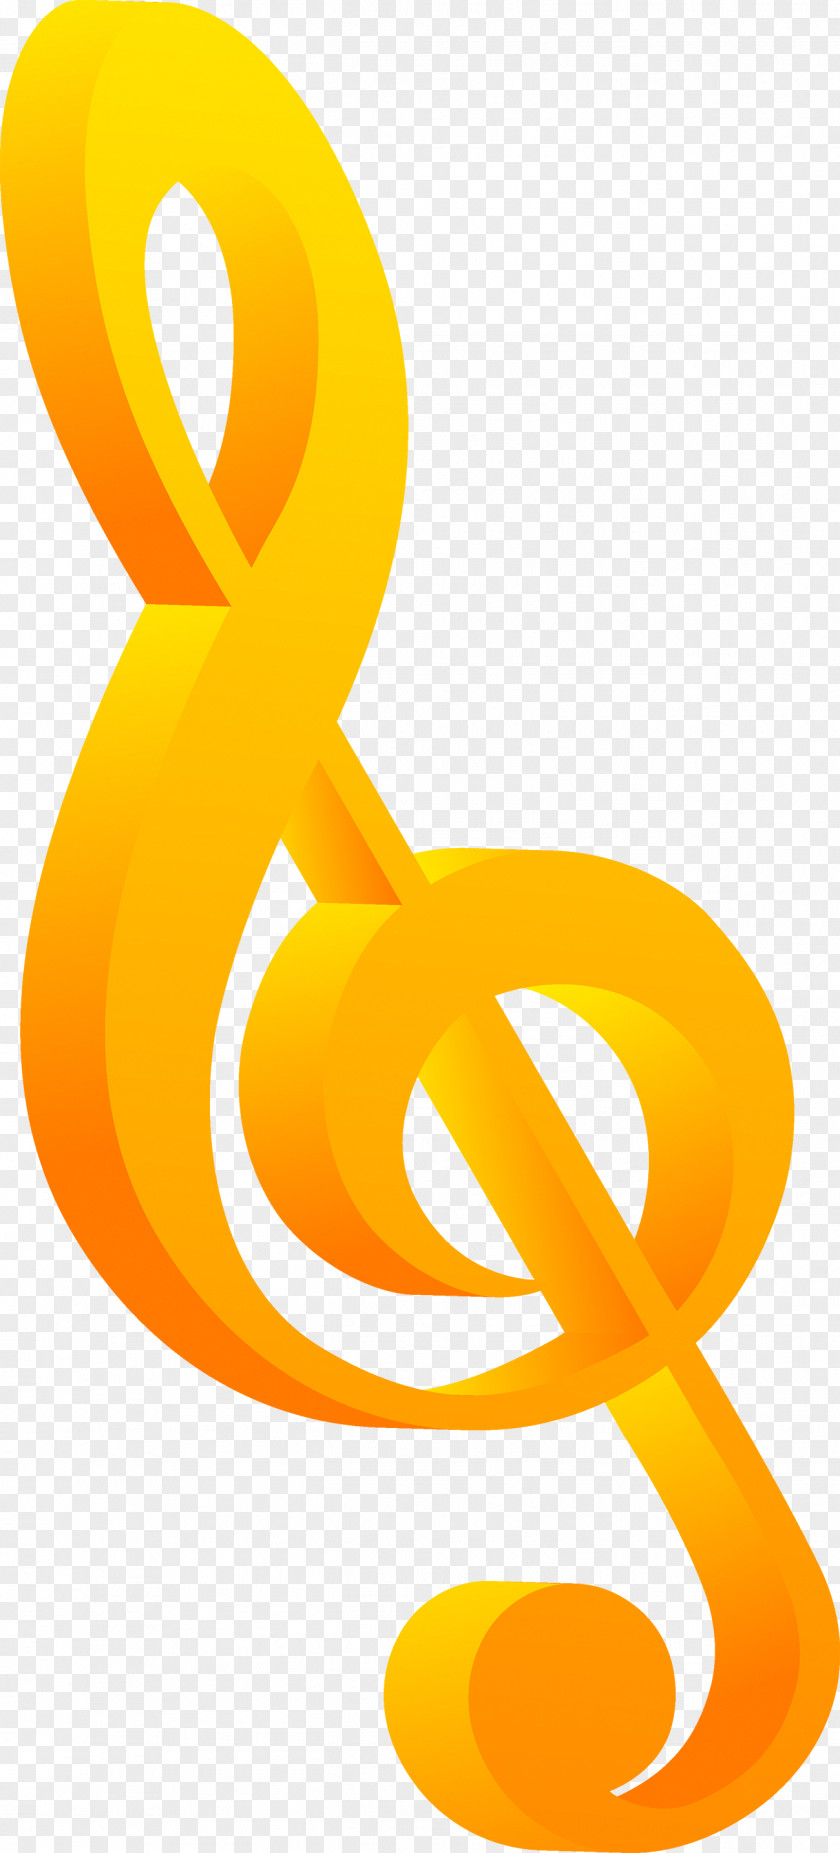 Musical Note Clef Illustration PNG